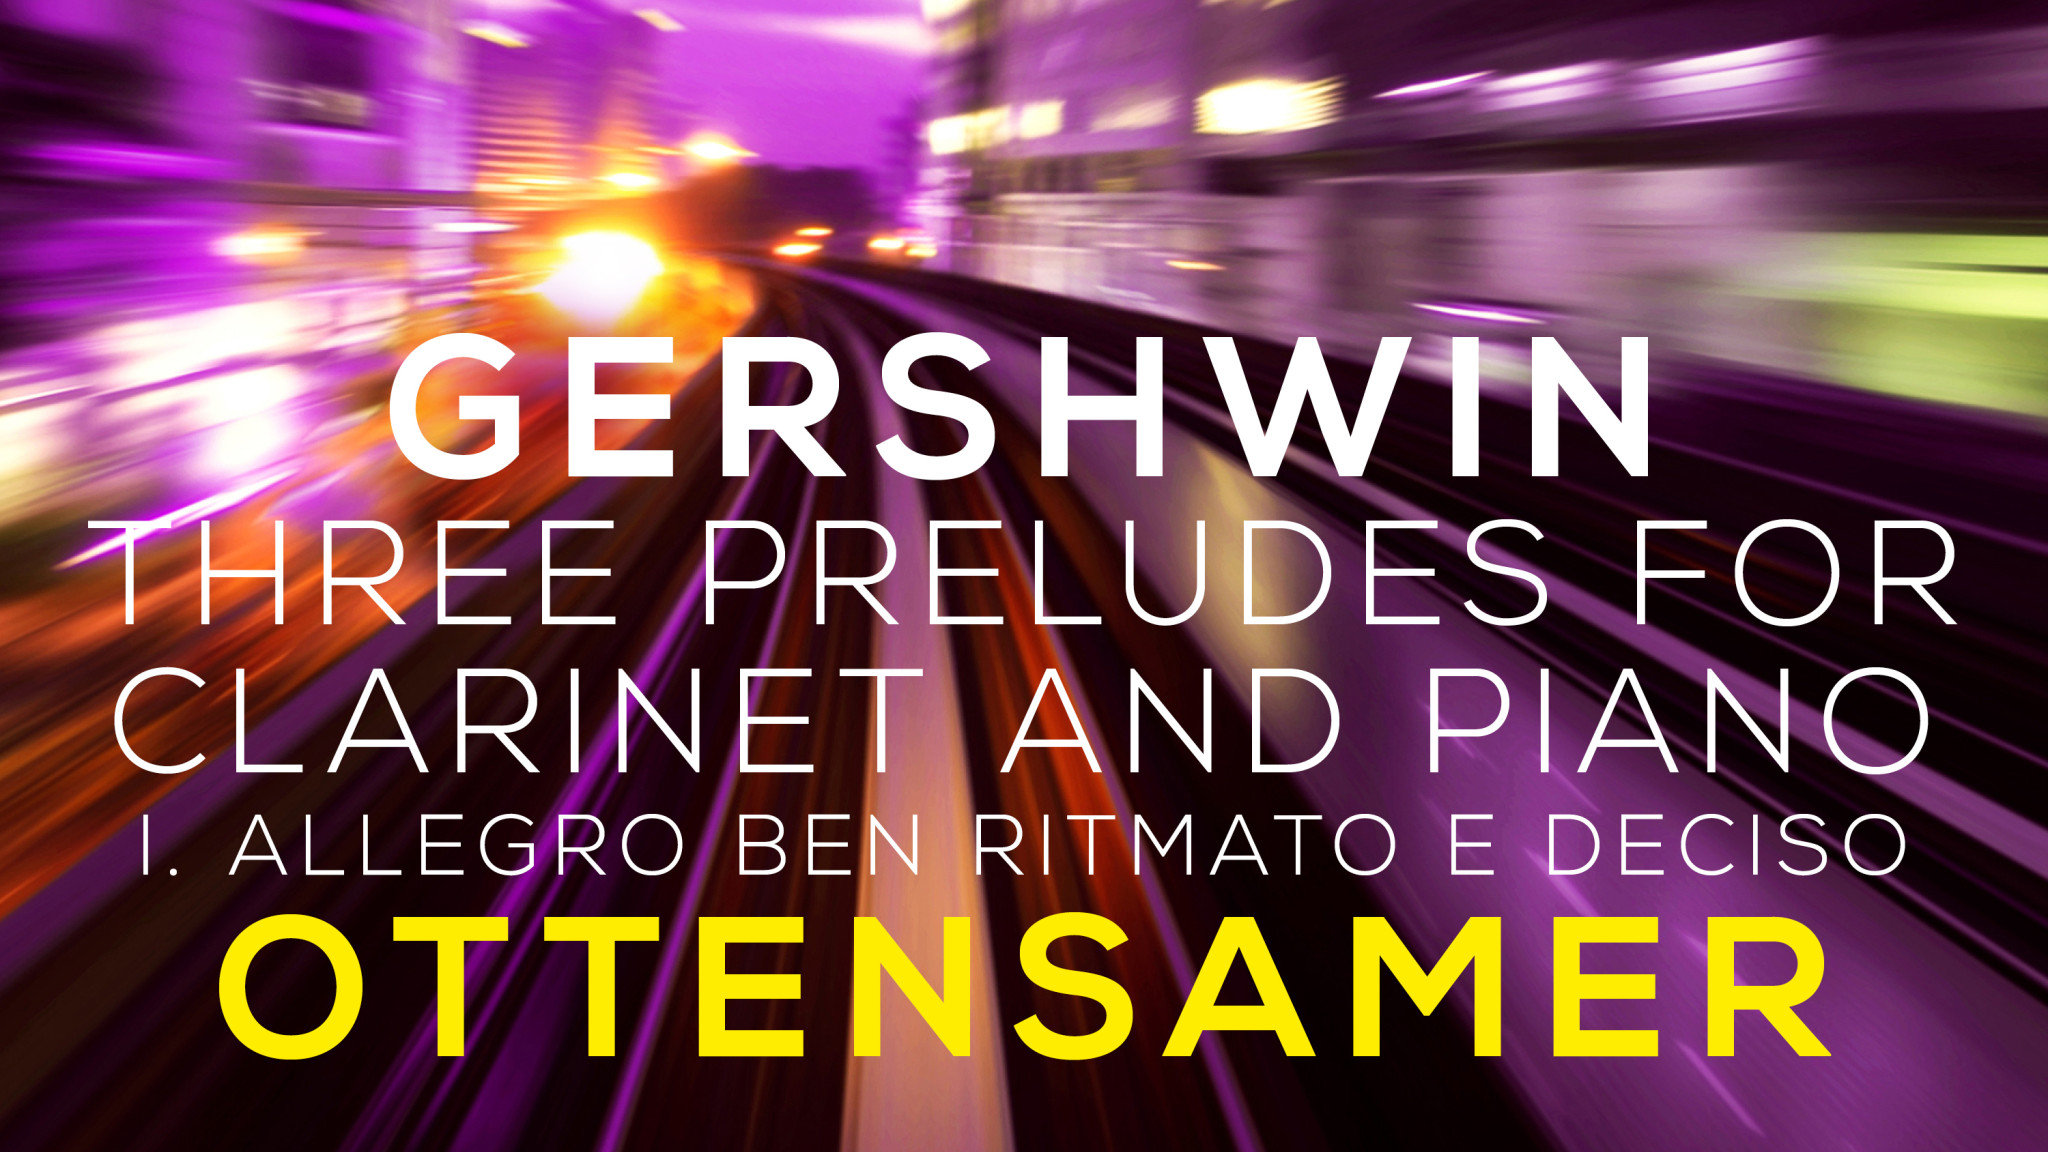 Musical Moments - Gershwin - Three Preludes - Andreas Ottensamer